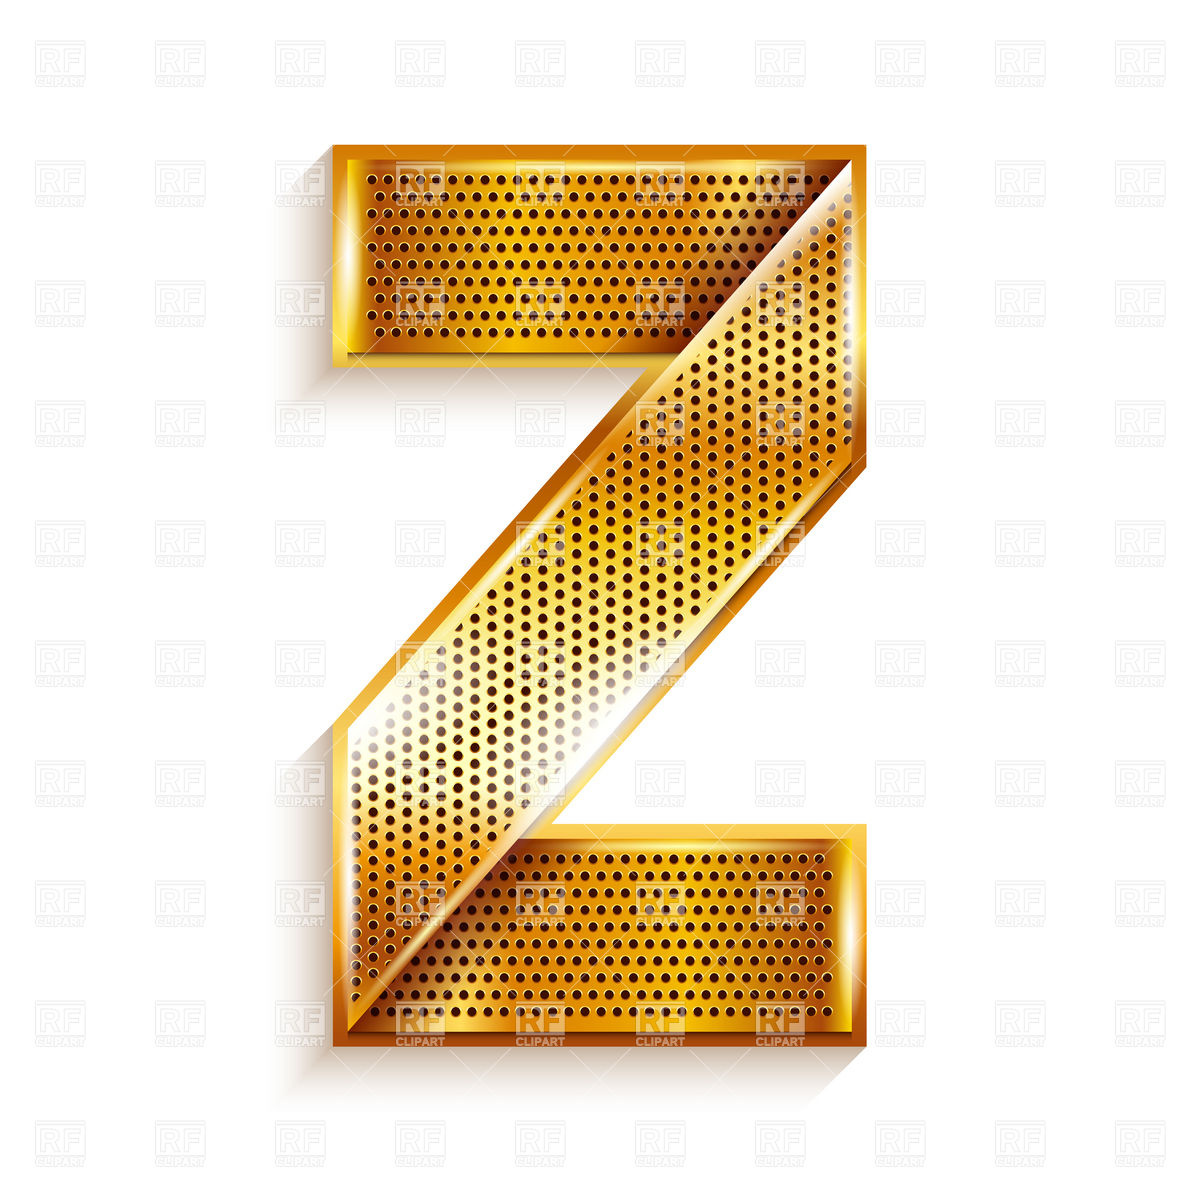 Alphabet Made Of Golden Perforated Tape Letter Z Download Royalty